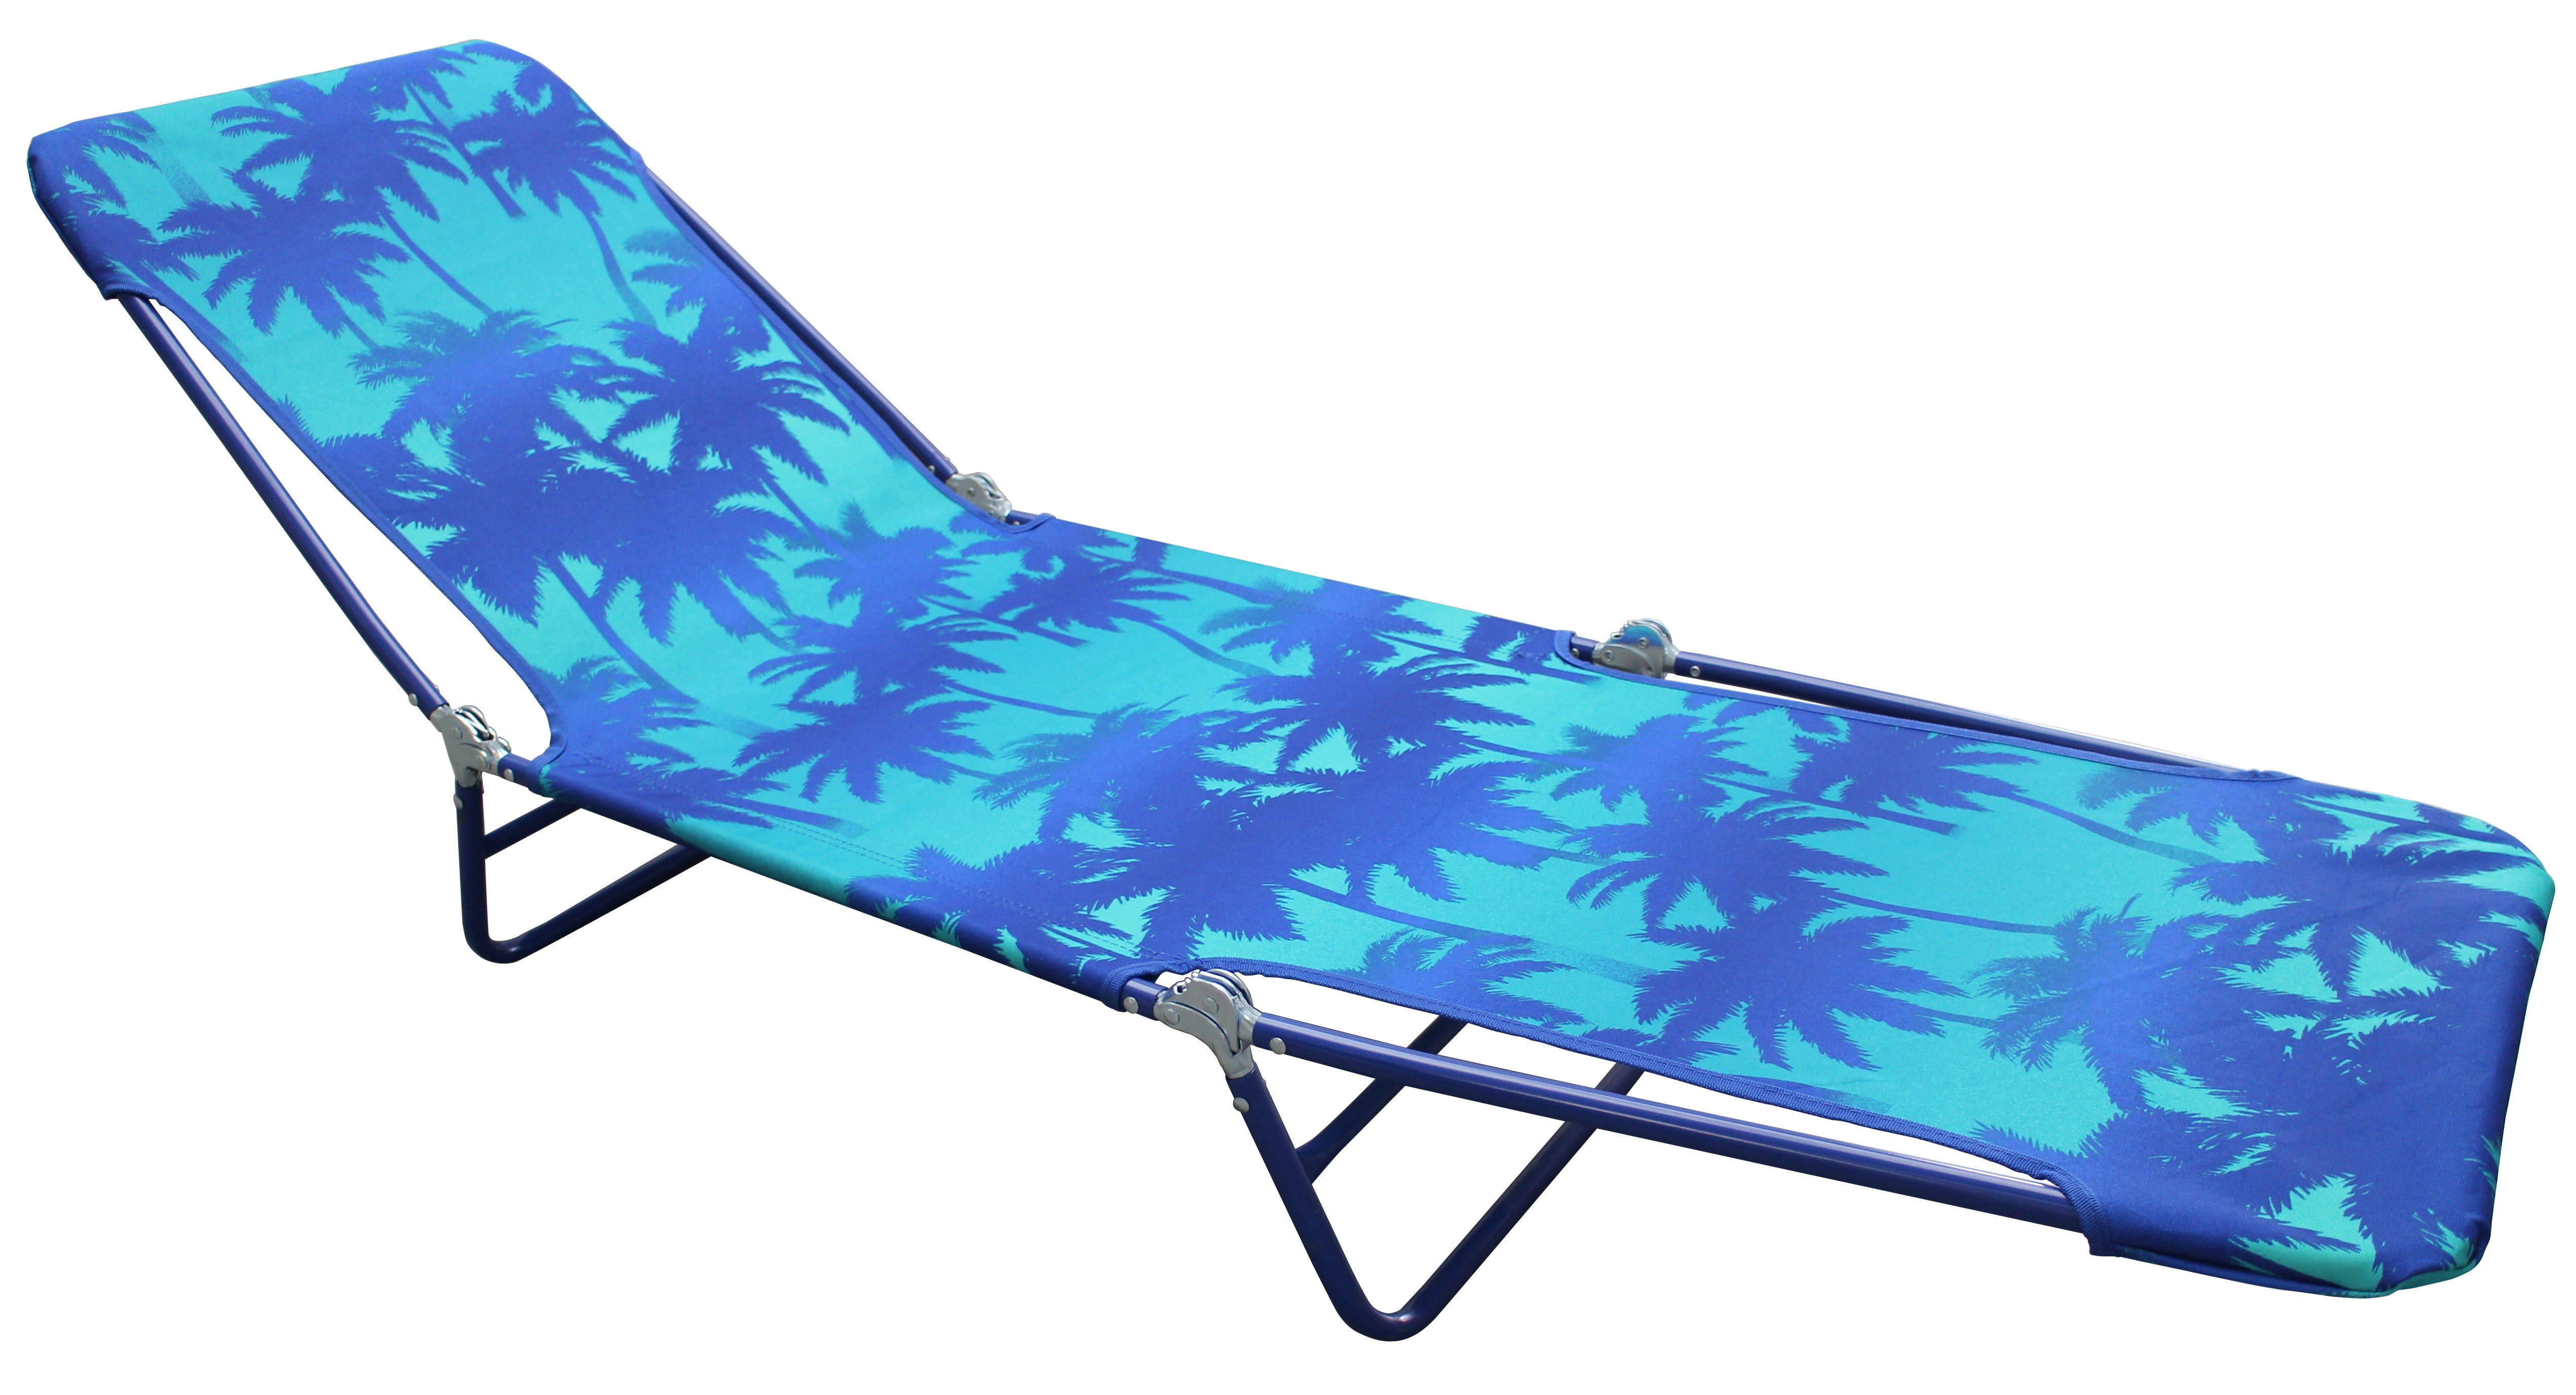 Mainstays Foldable Polyester Outdoor Chaise Lounge - Blue - Walmart.com